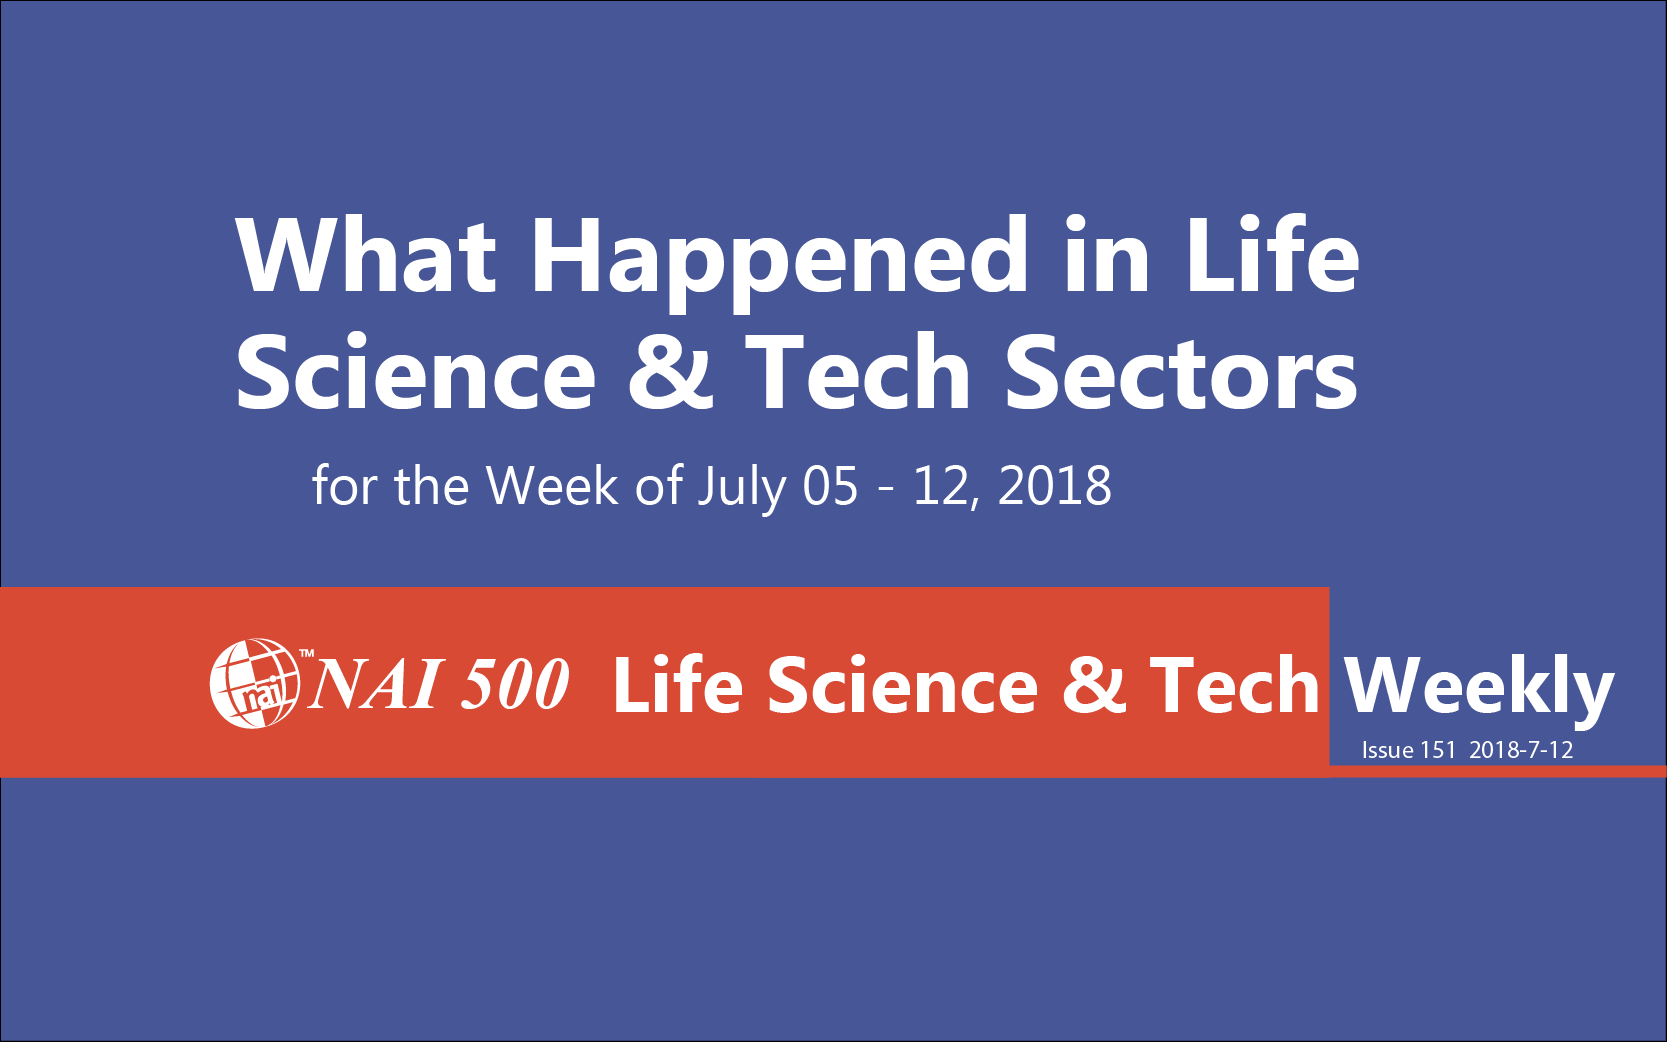 Life-Science_Weekly_cover-011